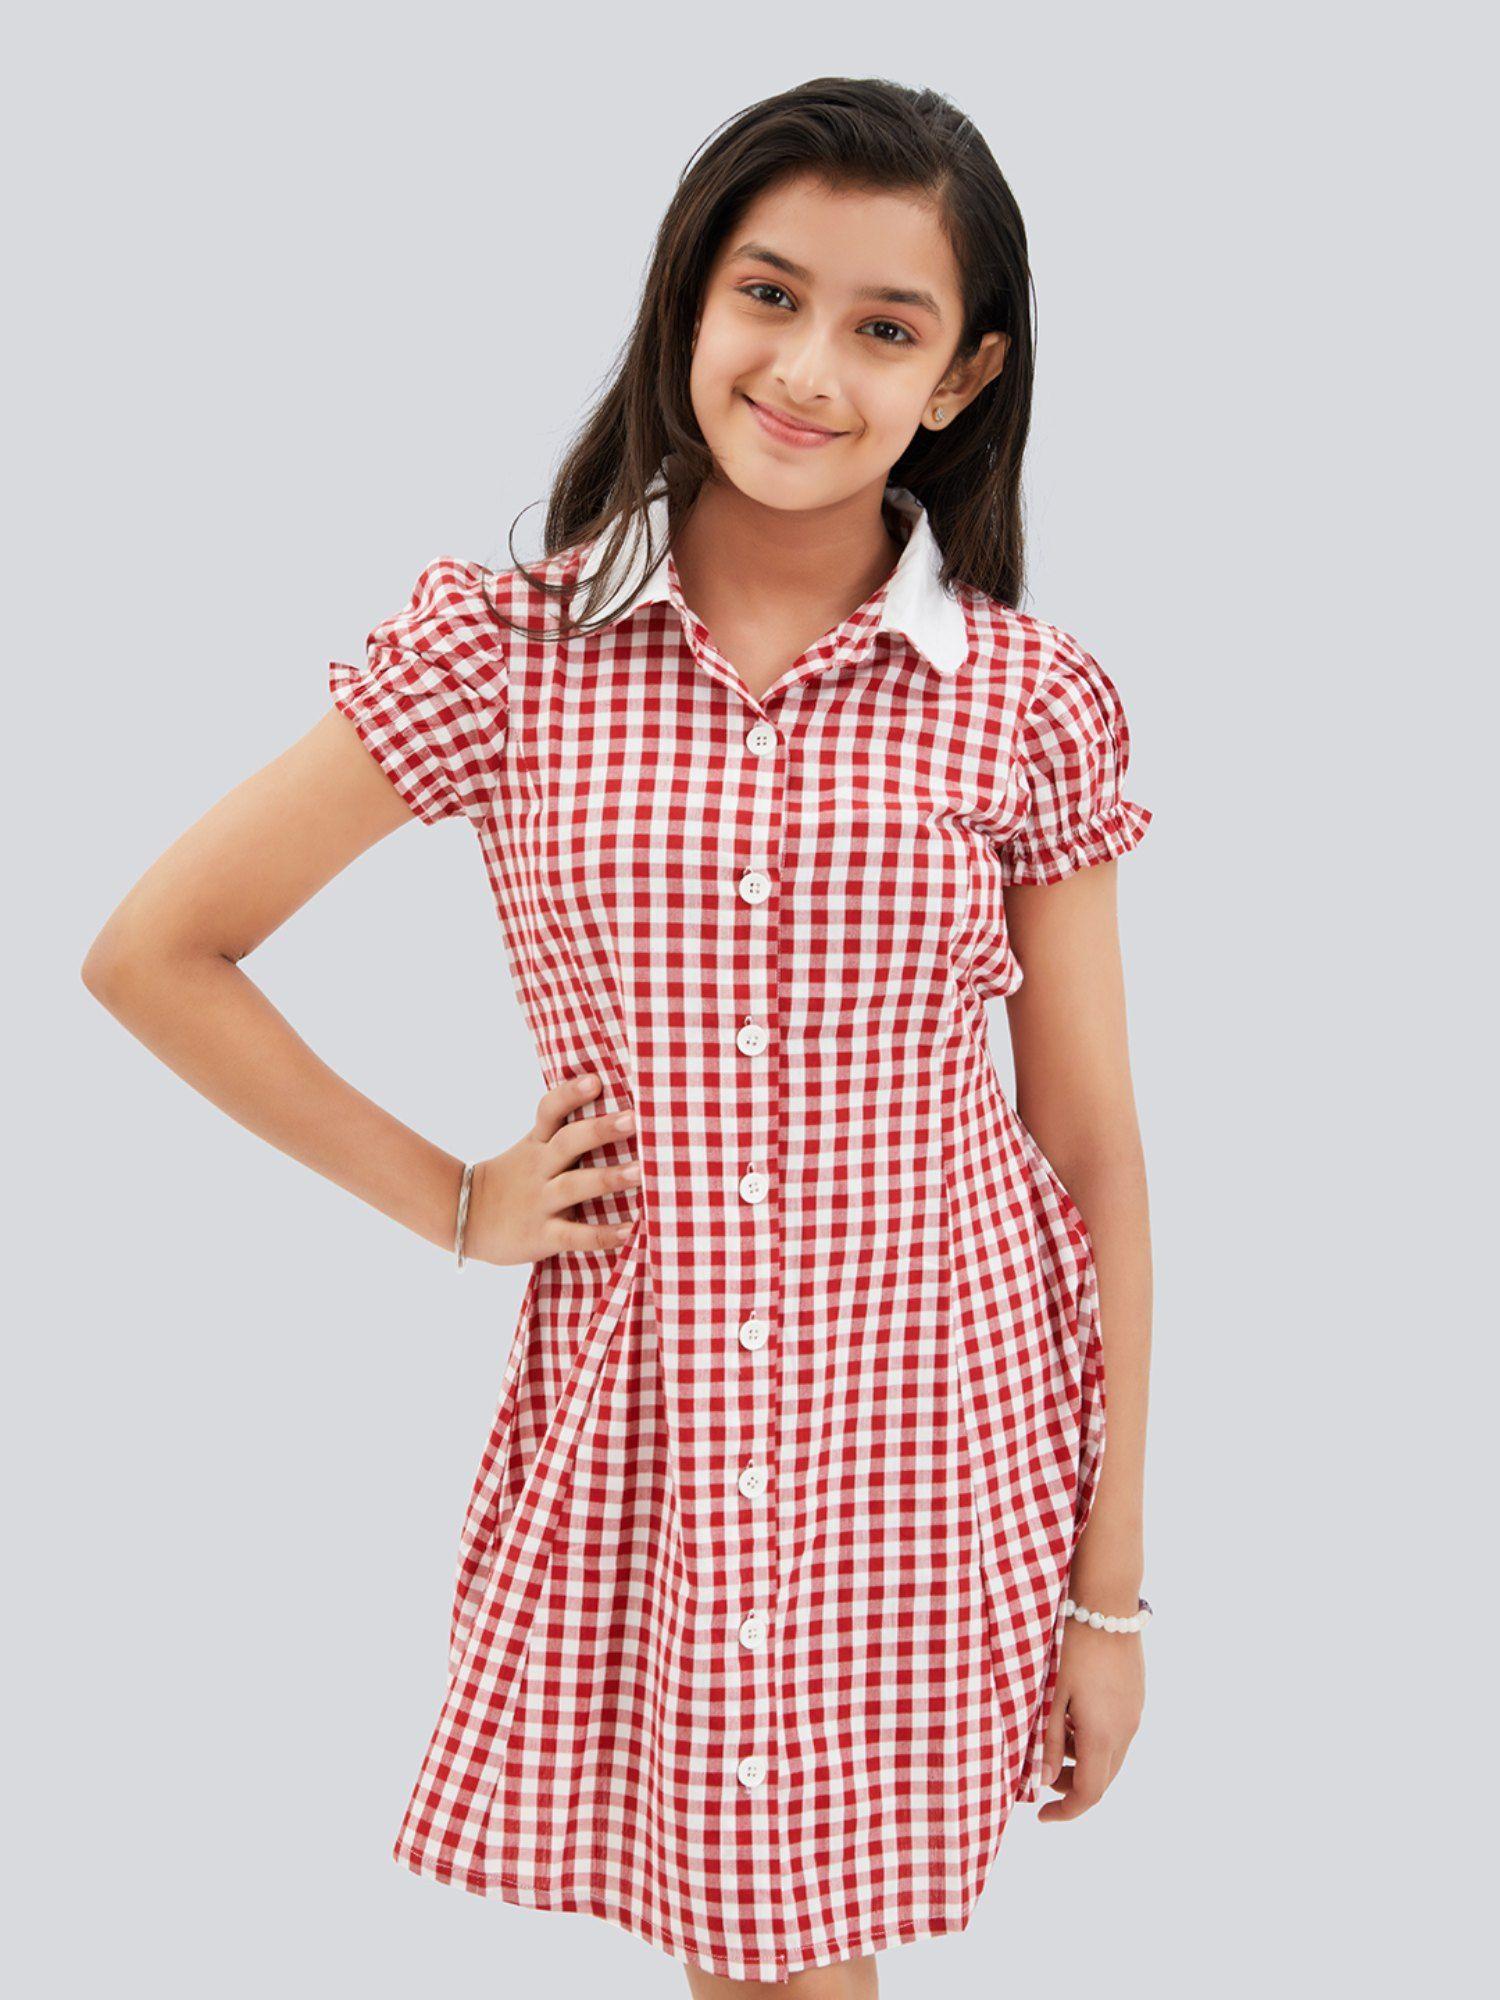 bombay dress with peter pan collar - red and white gingham check